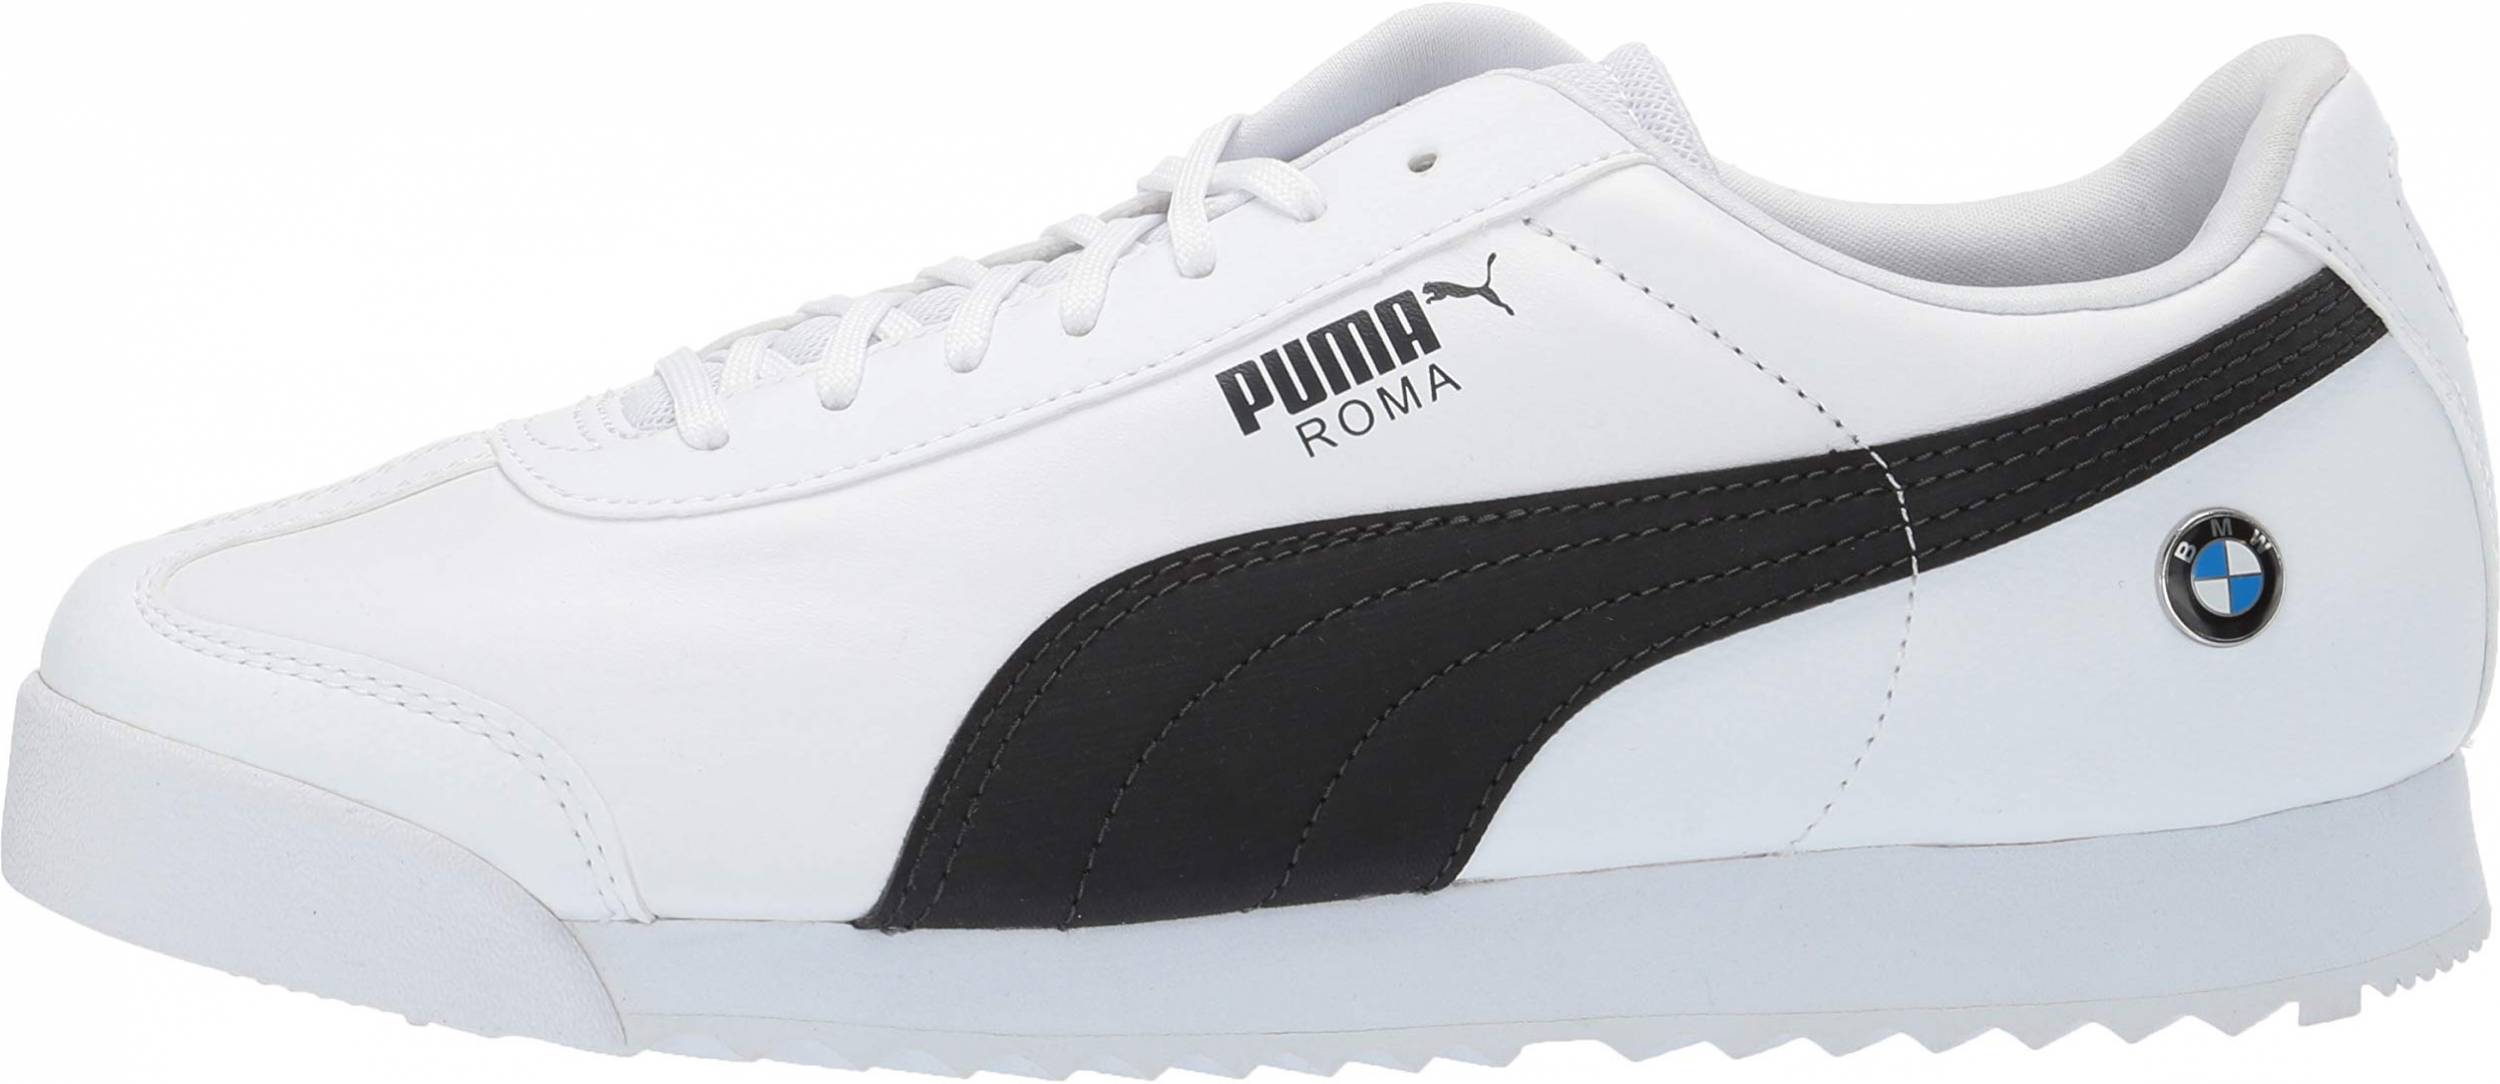 Puma BMW MMS Roma sneakers in 4 colors (only $52) | RunRepeat